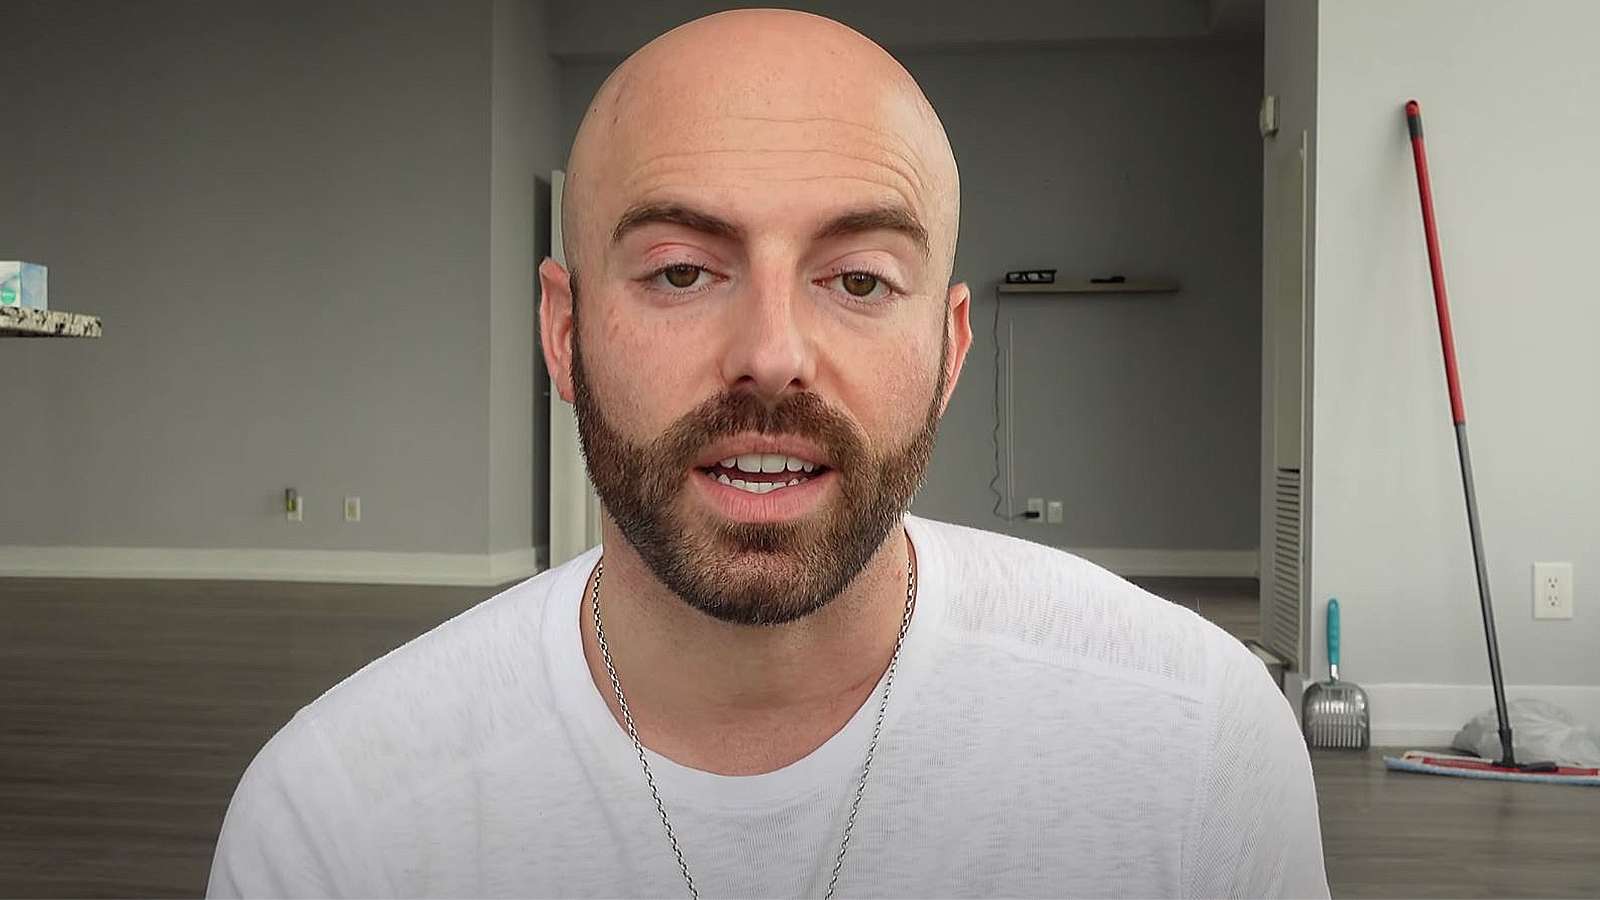 YouTuber Matthew Santoro soberly tells his fans that all of his belongings were stolen out of a moving trailer.